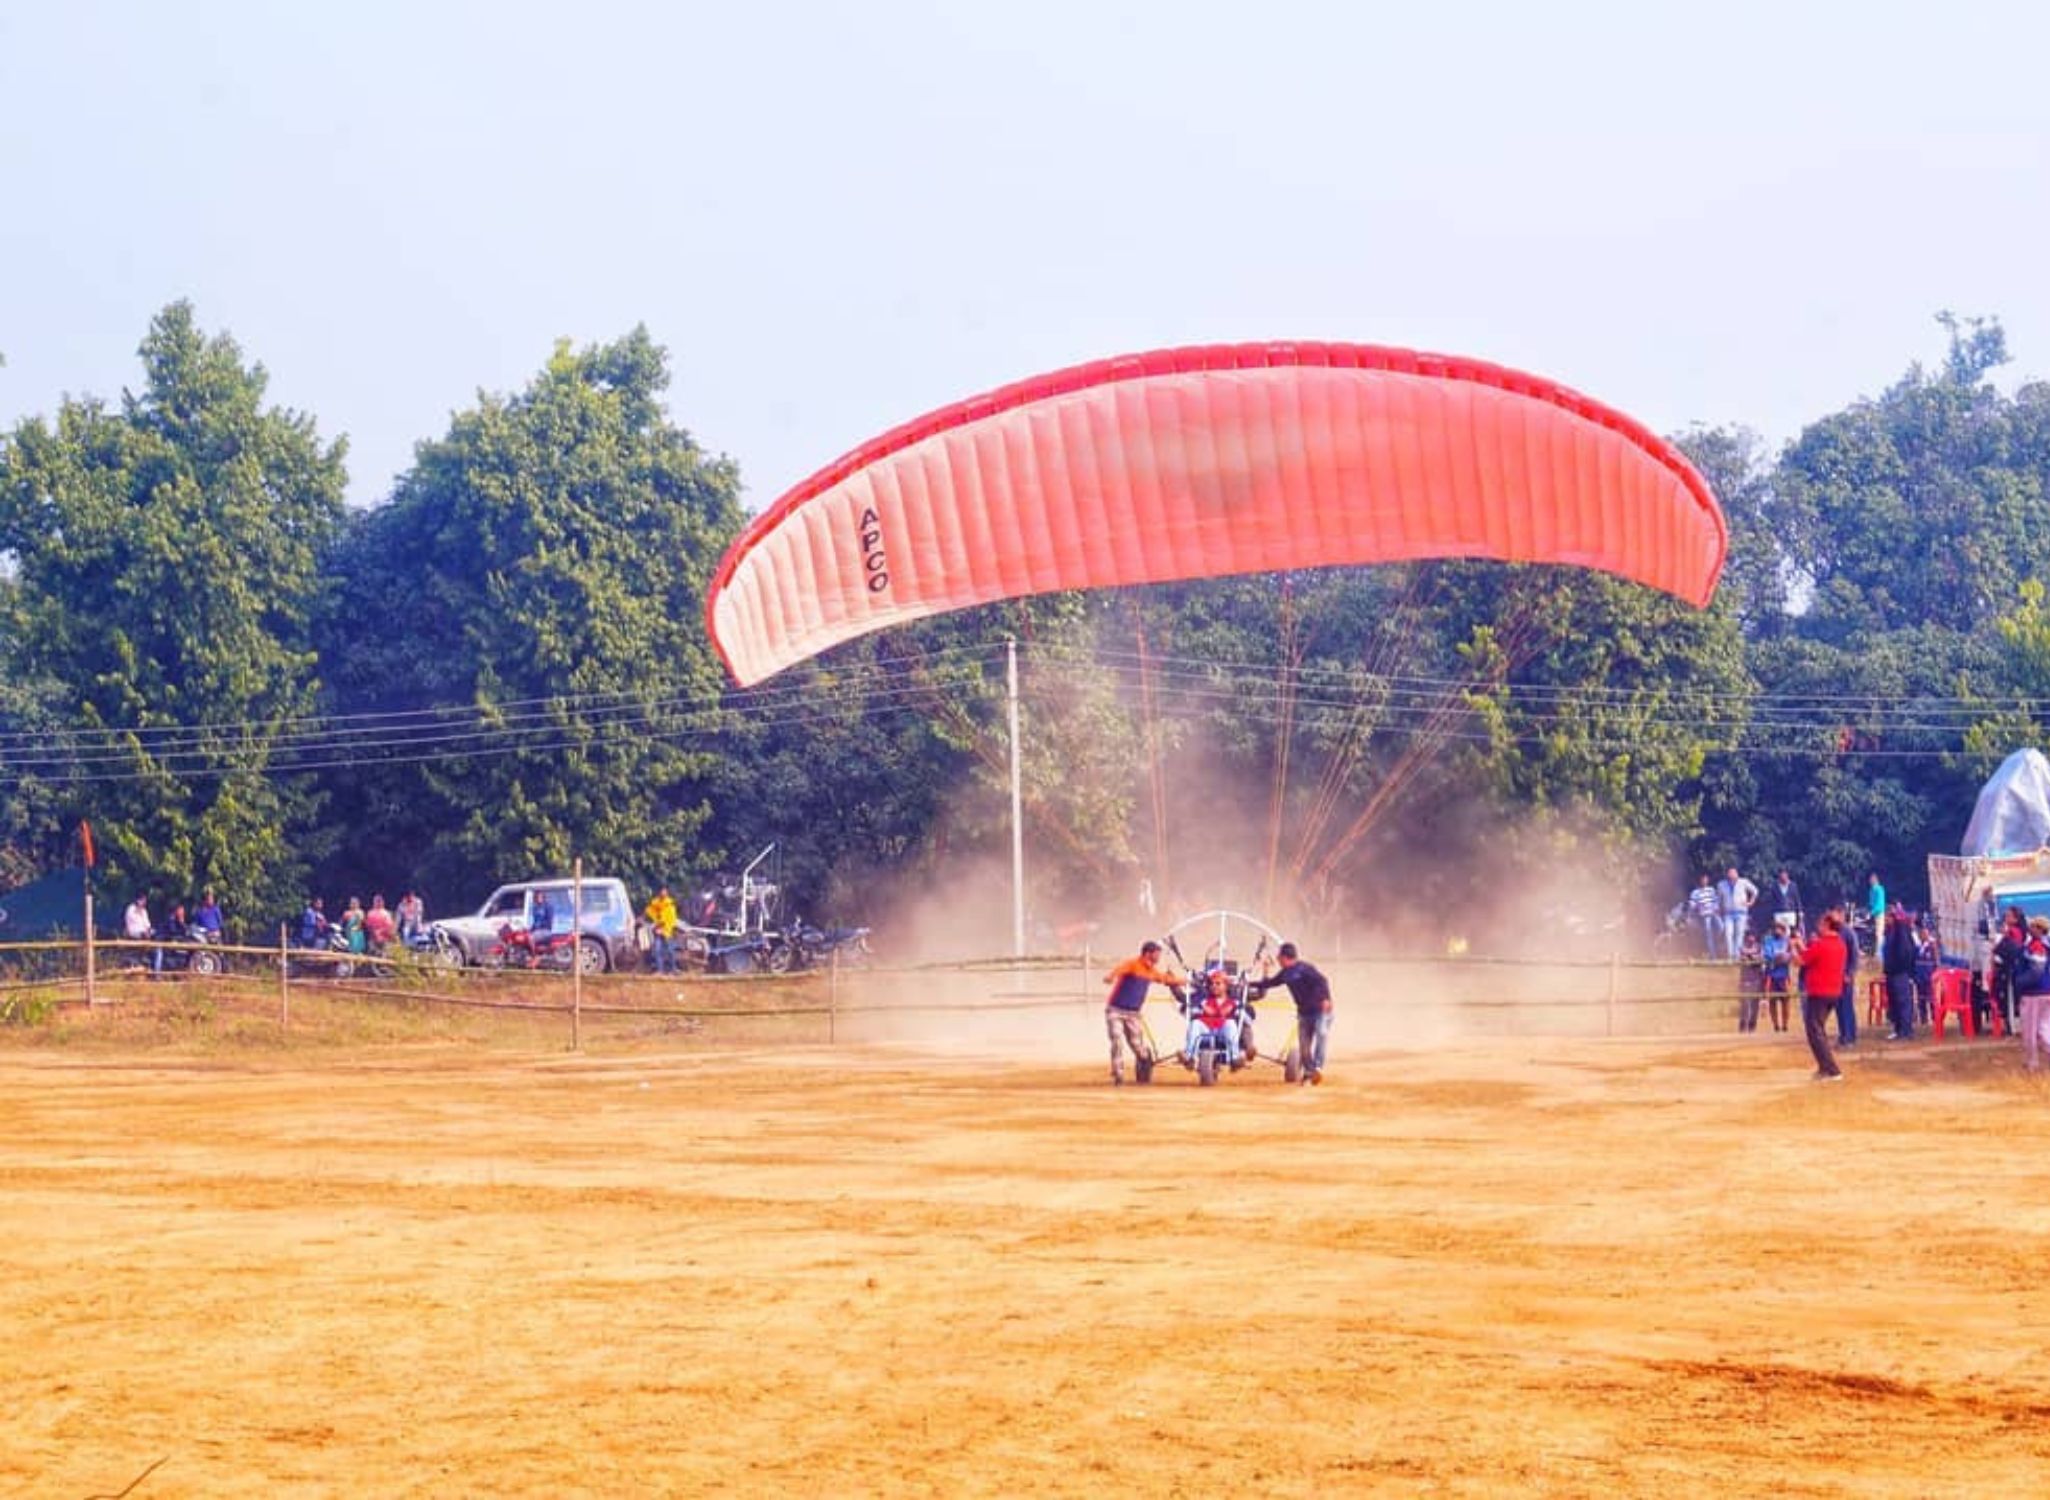 Powered Paragliding in Nagpur